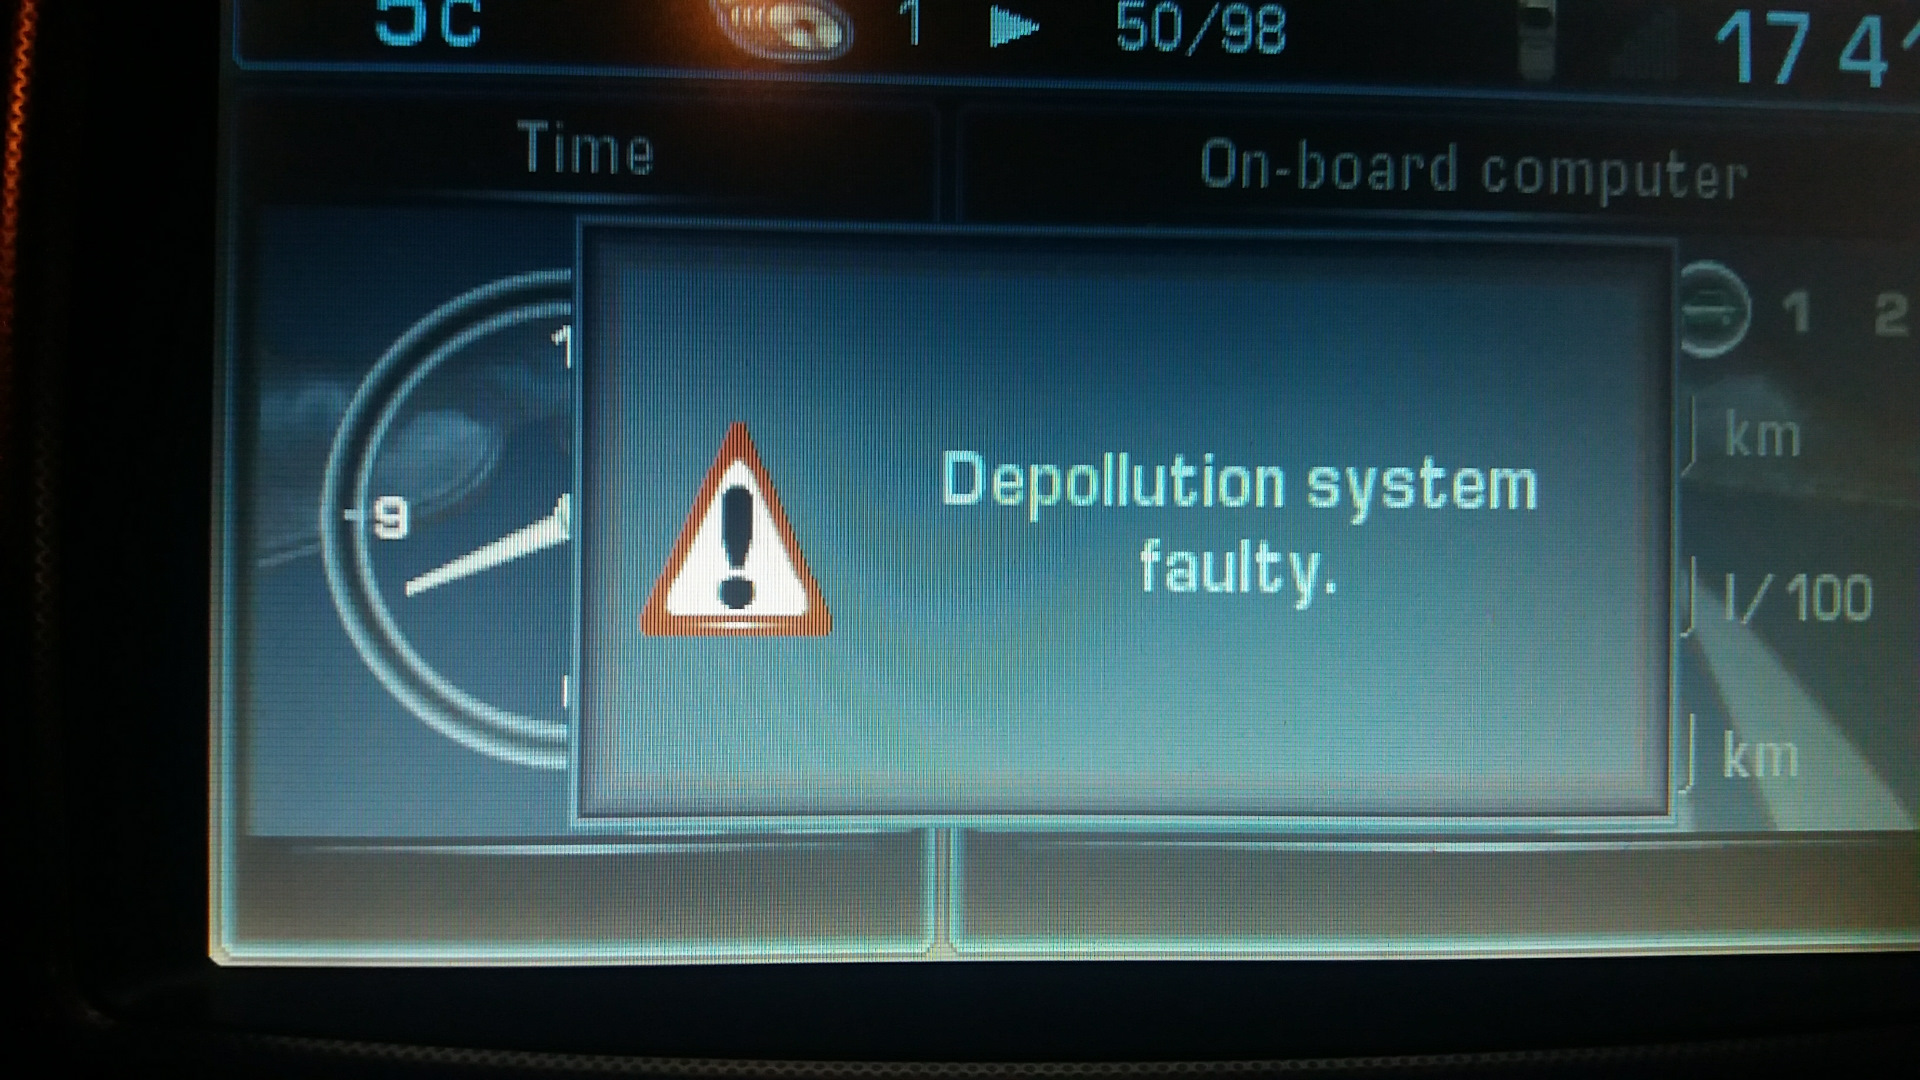 Depollution system faulty